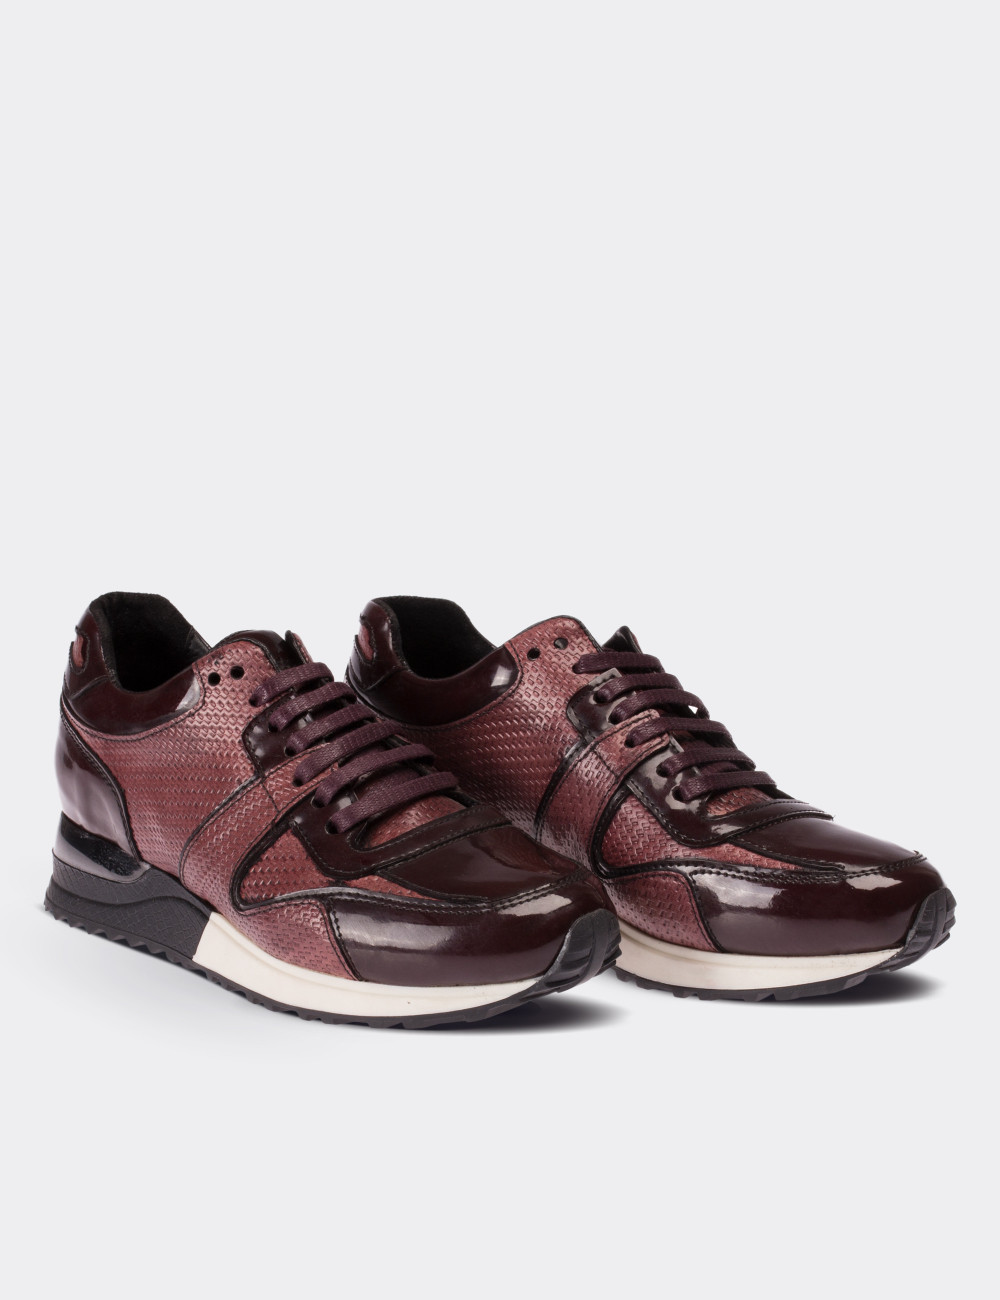 Burgundy Patent Leather Sneakers - 01522ZBRDT01